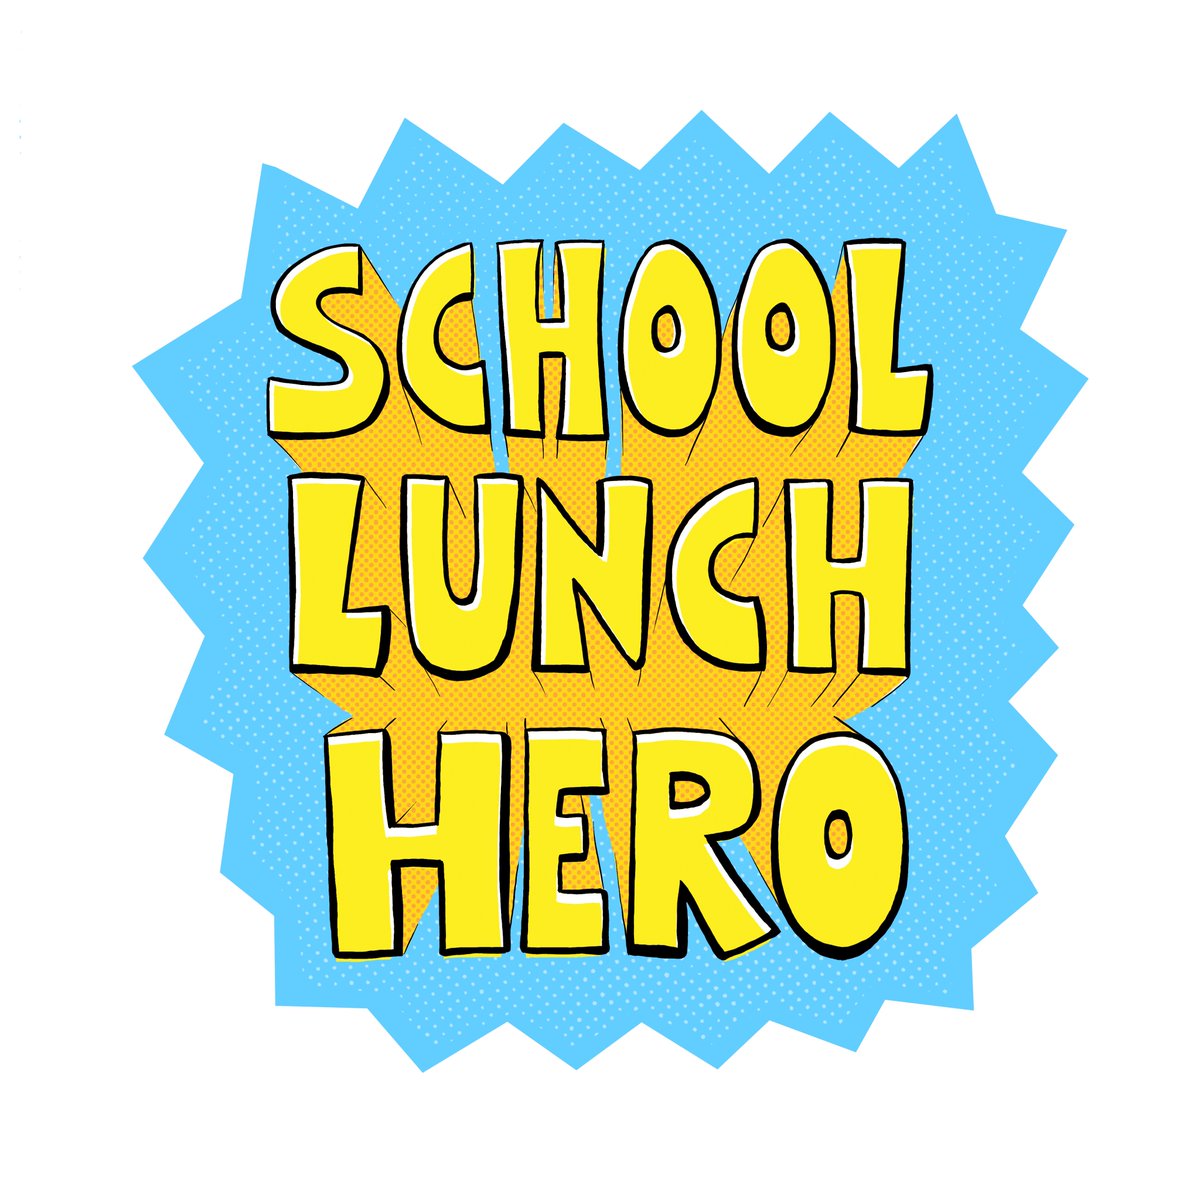 It’s School Lunch Hero Day! Today we celebrate our school nutrition professionals that prepare healthy meals for students, adhere to nutrition standards, navigate food allergies, and offer service with a smile.